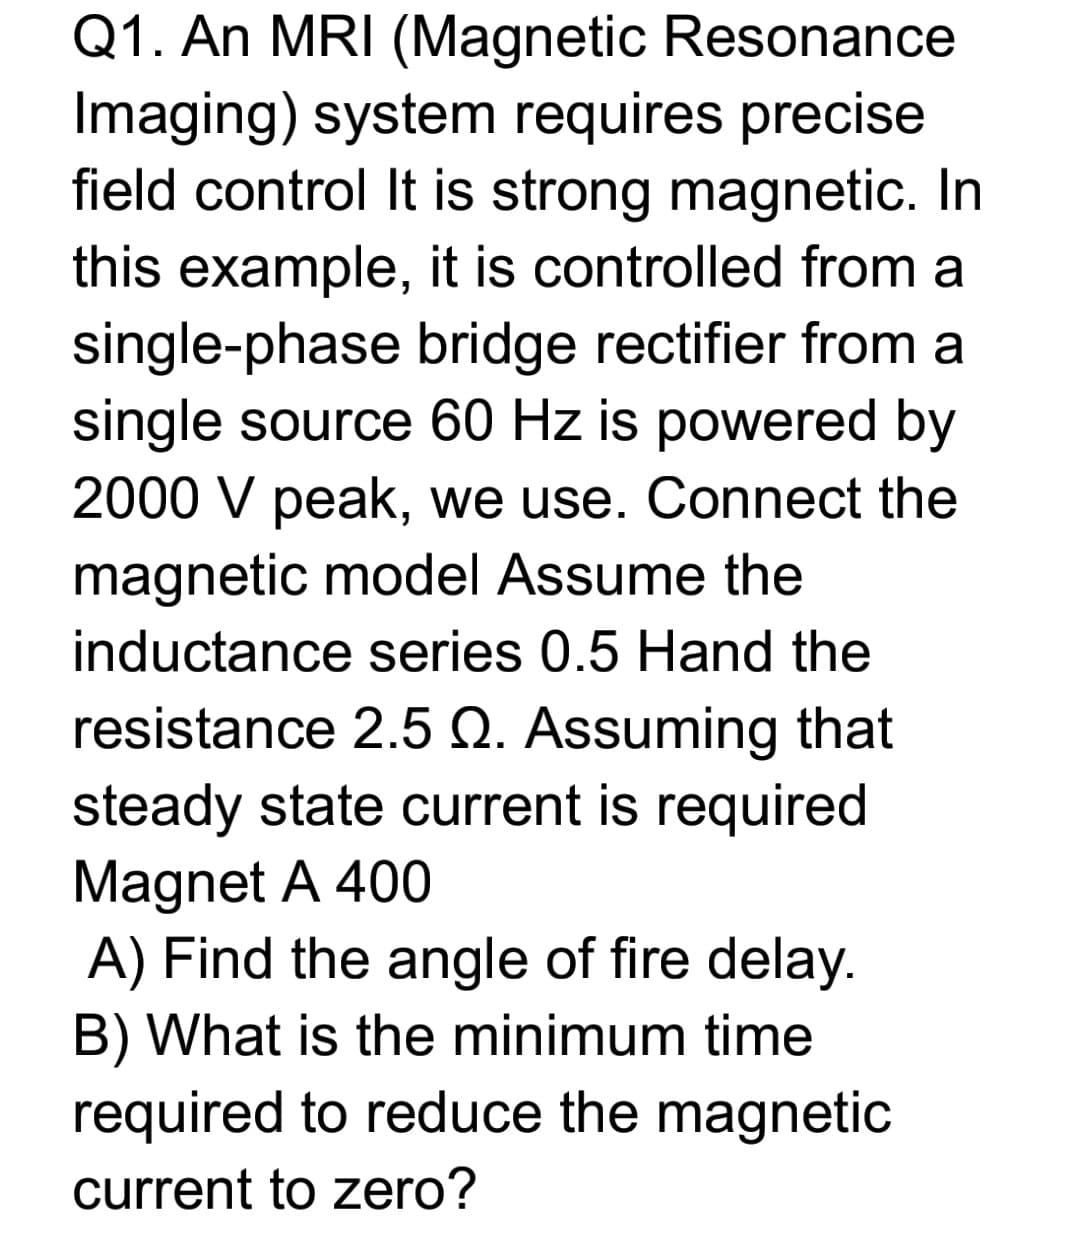 Q1. An MRI (Magnetic Resonance
Imaging) system requires precise
field control It is strong magnetic. In
this example, it is controlled from a
single-phase bridge rectifier from a
single source 60 Hz is powered by
2000 V peak, we use. Connect the
magnetic model Assume the
inductance series 0.5 Hand the
resistance 2.5 Q. Assuming that
steady state current is required
Magnet A 400
A) Find the angle of fire delay.
B) What is the minimum time
required to reduce the magnetic
current to zero?
